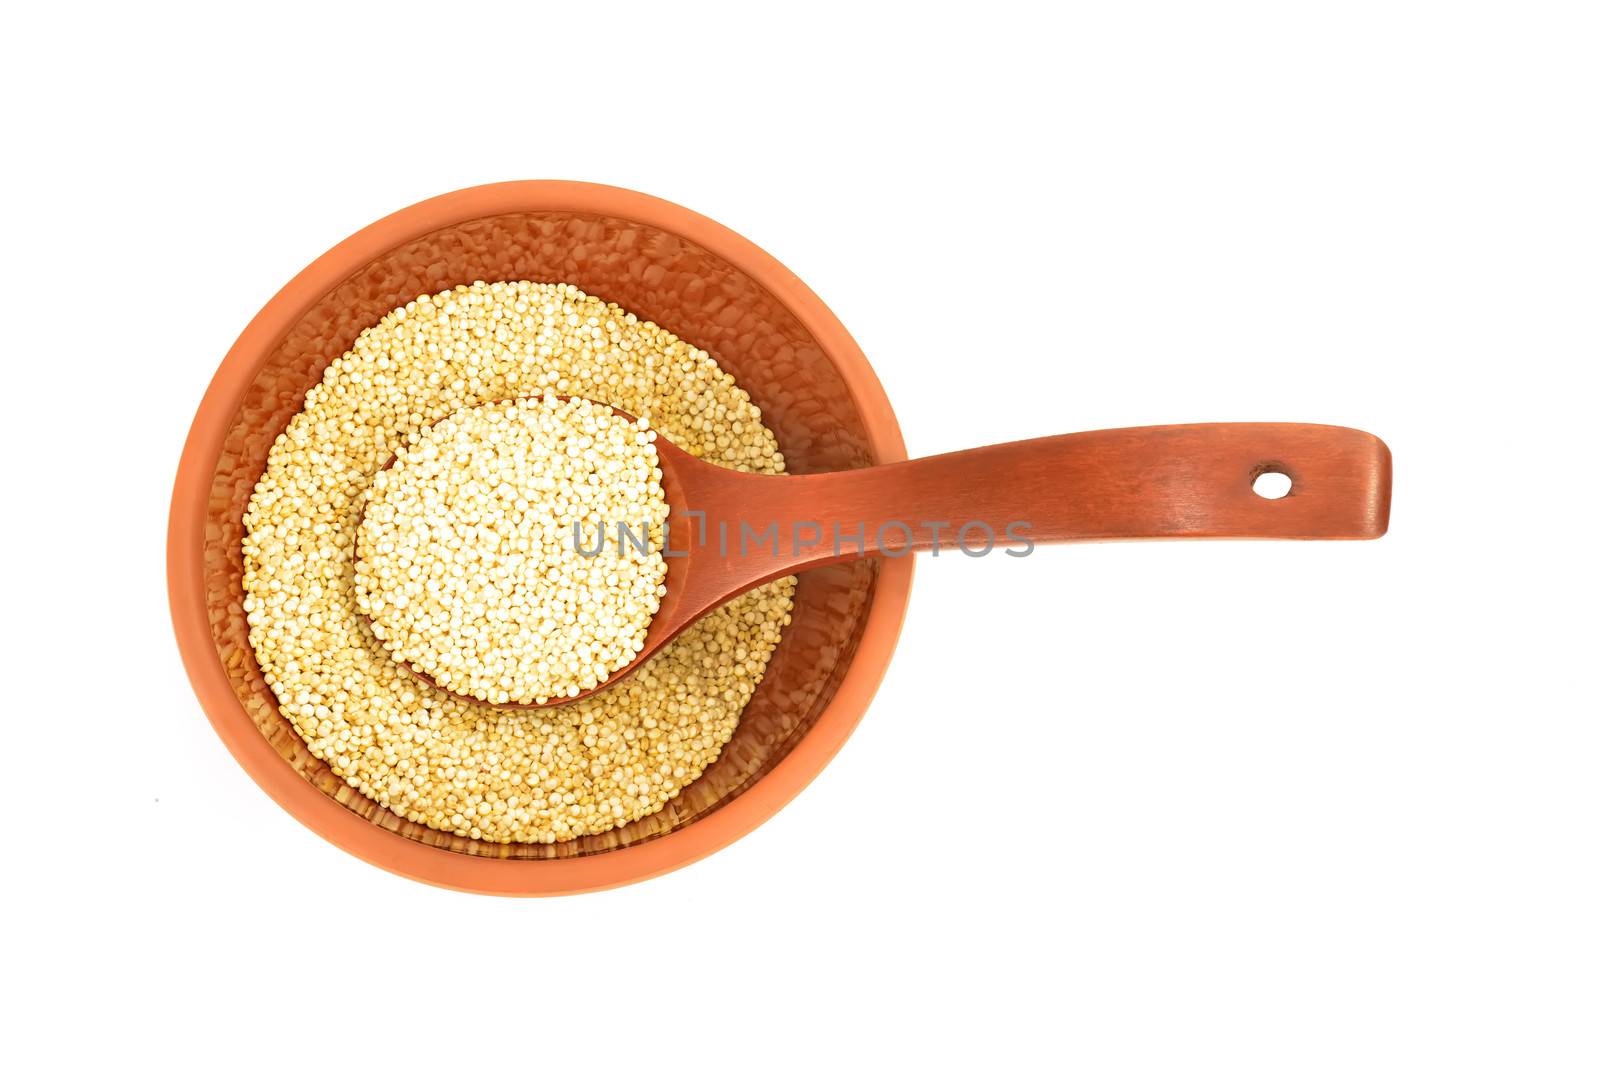 Chenopodium quinoa in clay bowl and wooden spoon isolated on white background